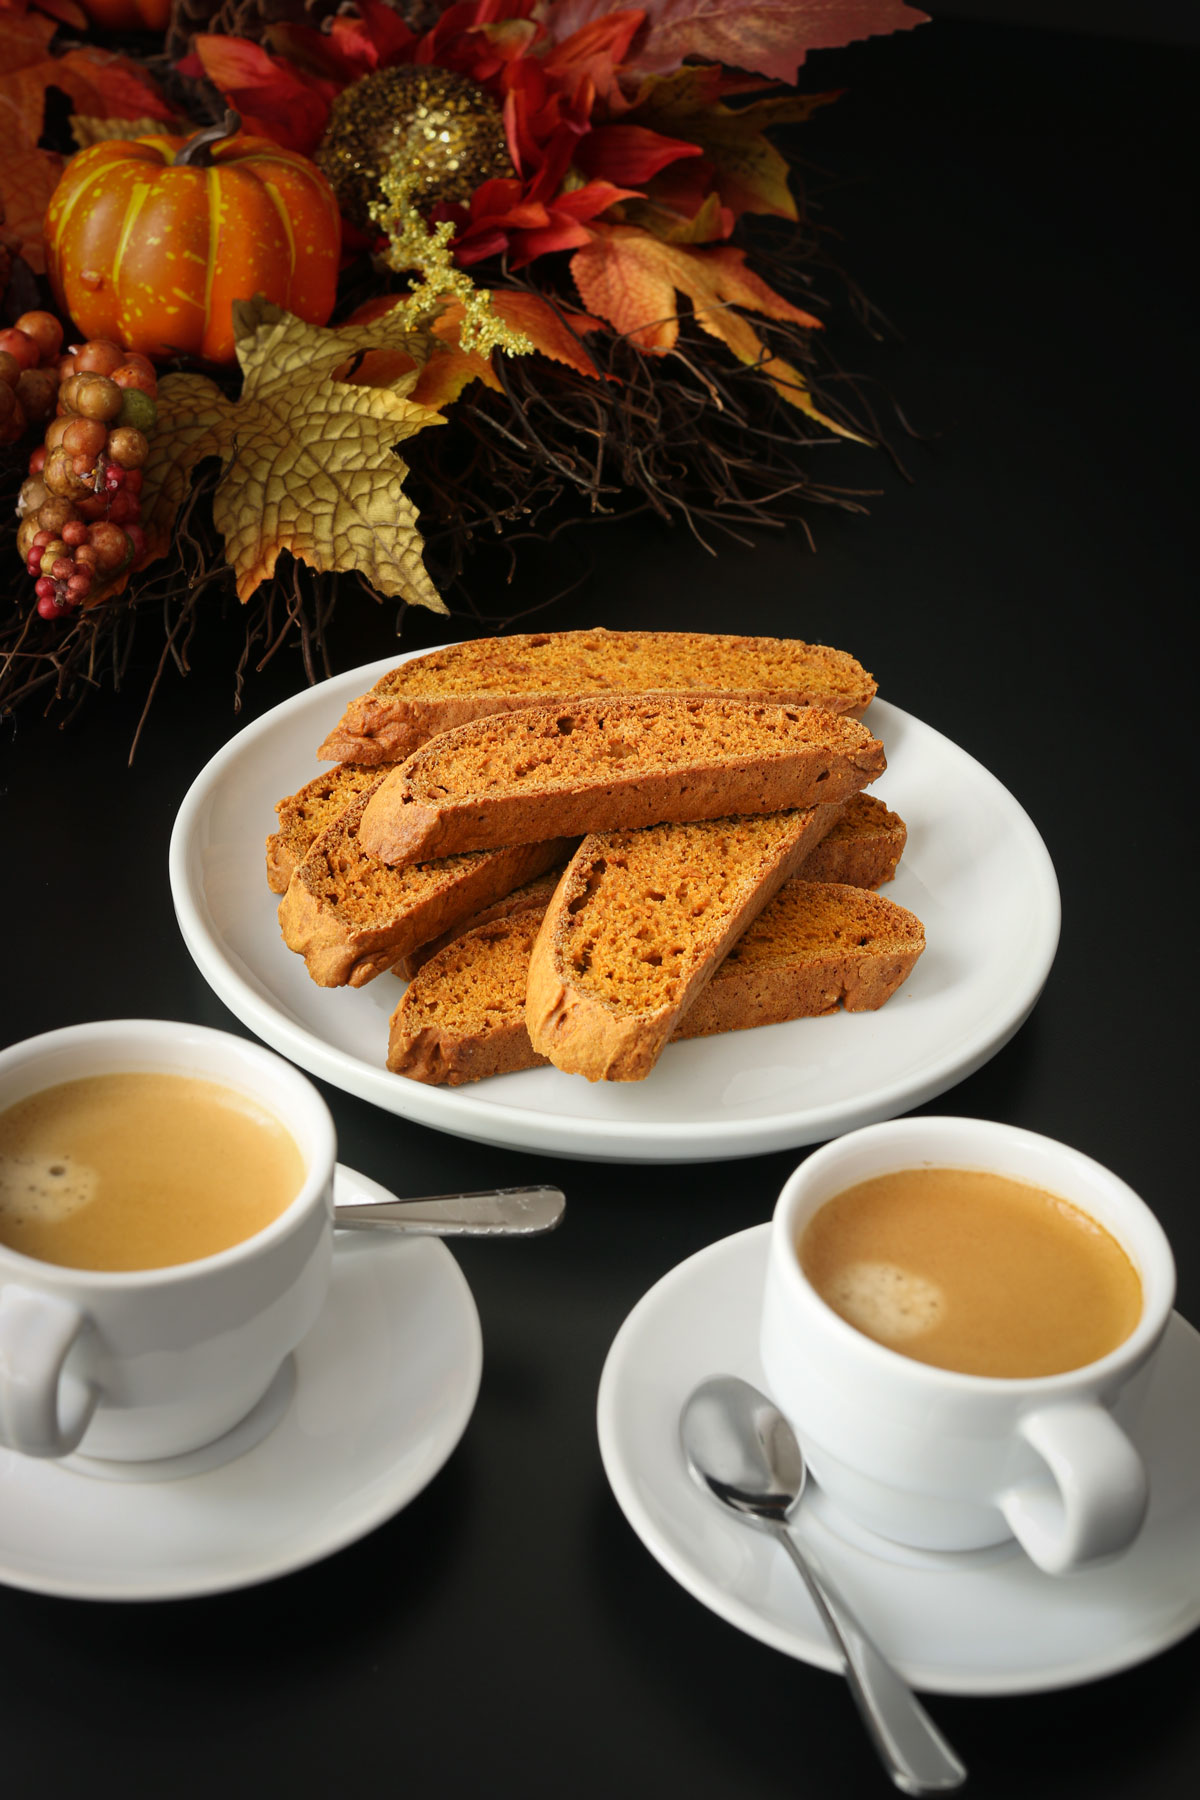 table set with fall decor, a platter of pumpkin biscotti and two demitasse cups of espresso with saucers and spoons.